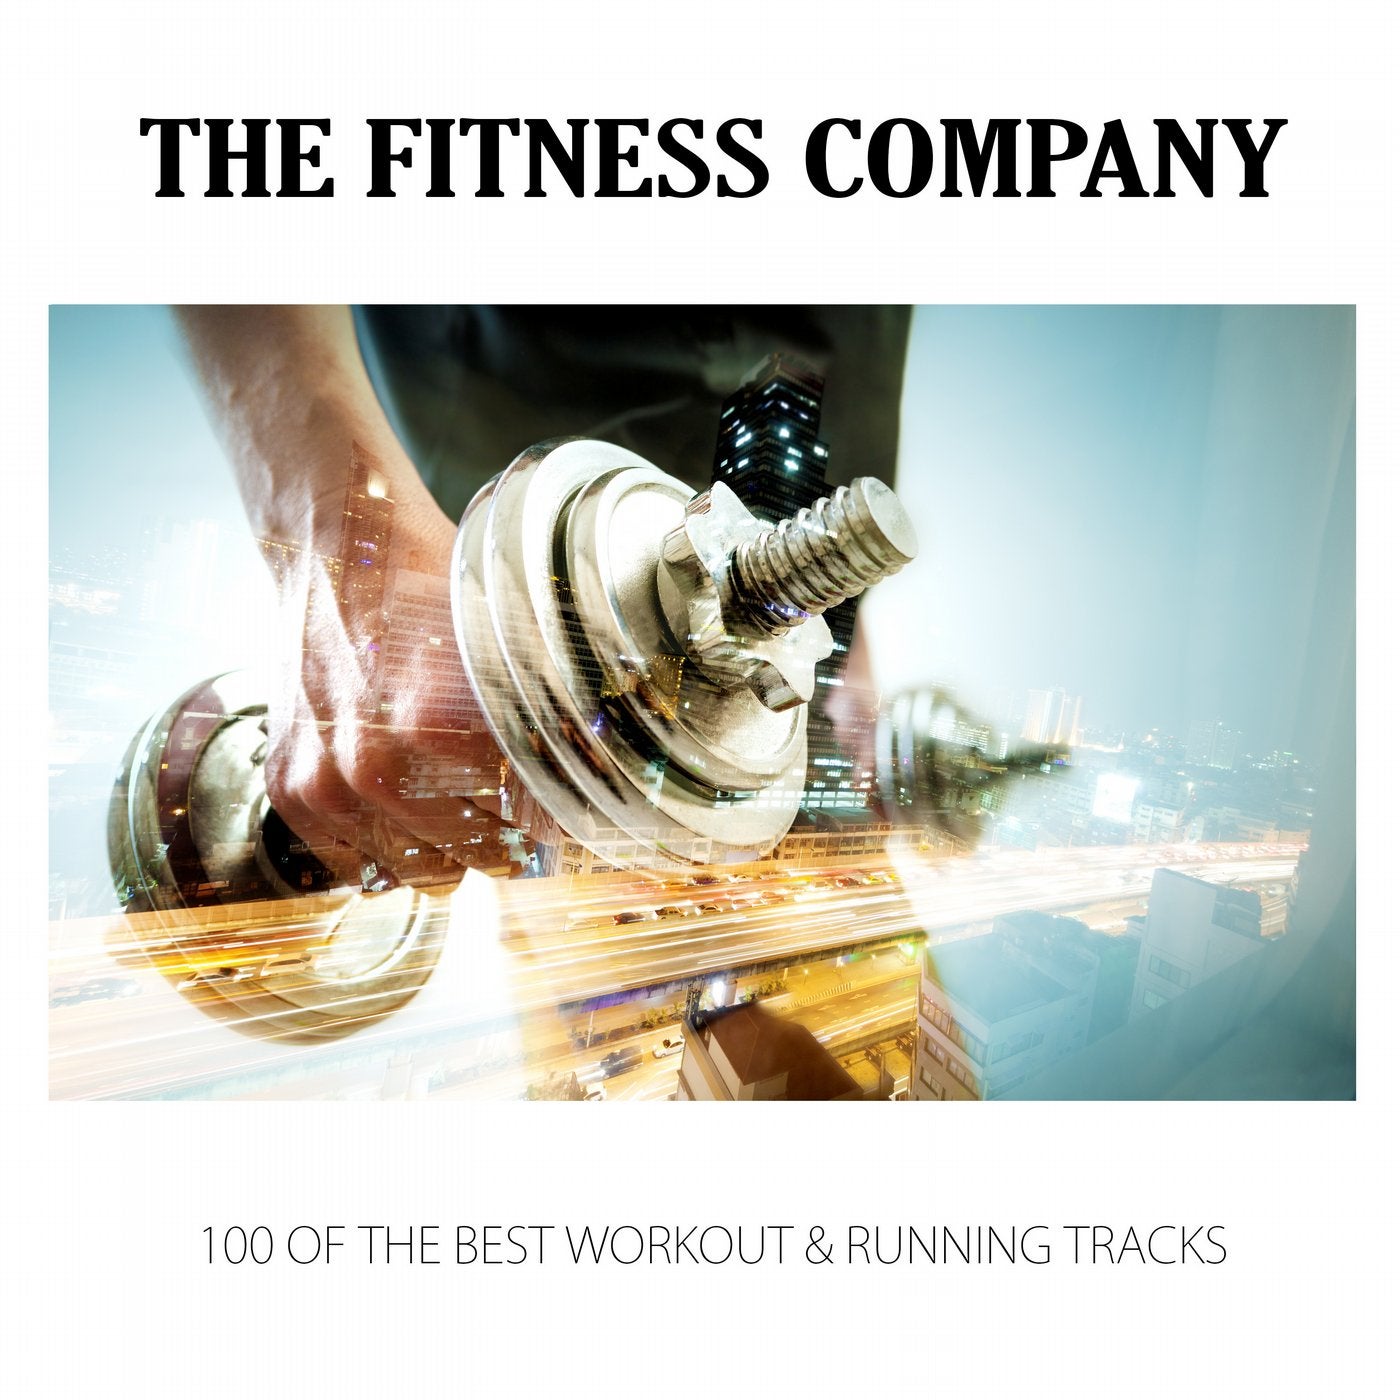 The Fitness Company 100 of the Best Workout & Running Tracks